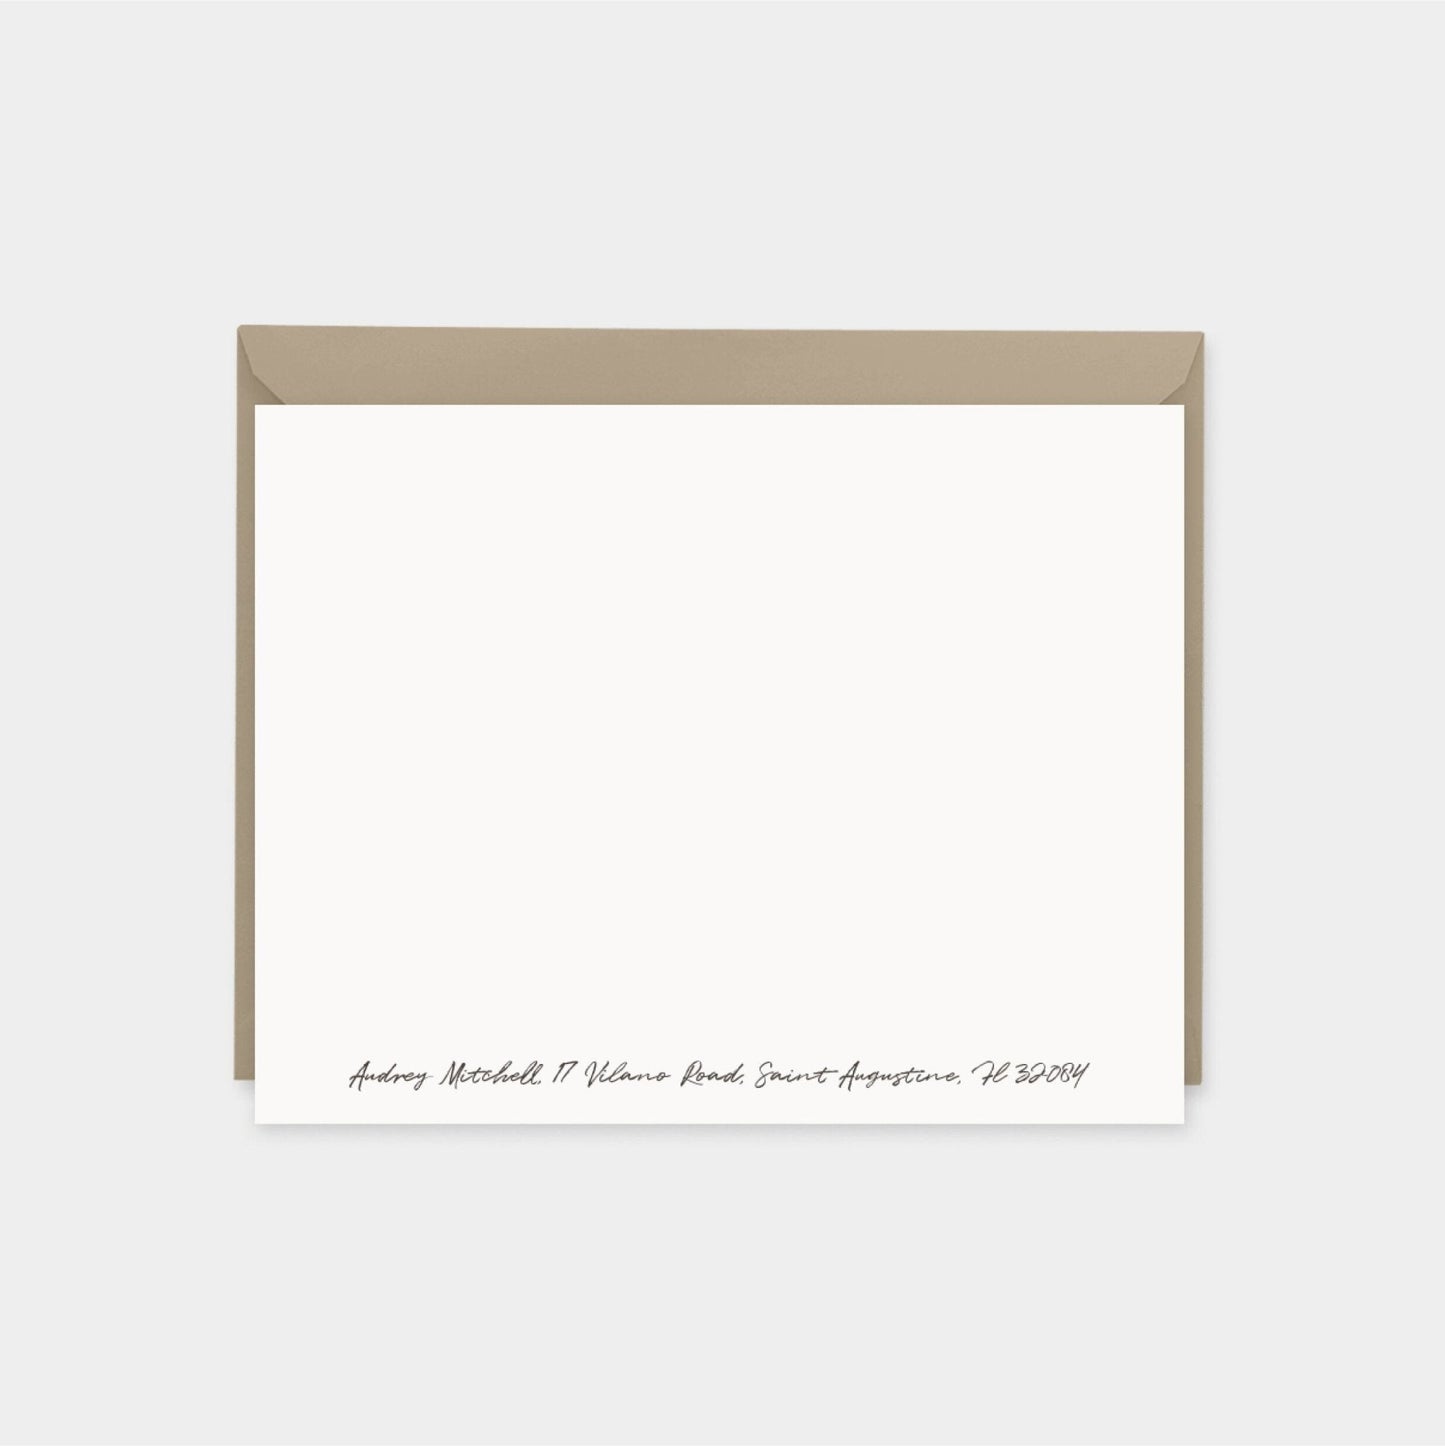 Light Blue Speckled Texture Note Cards,-Greeting & Note Cards-The Design Craft